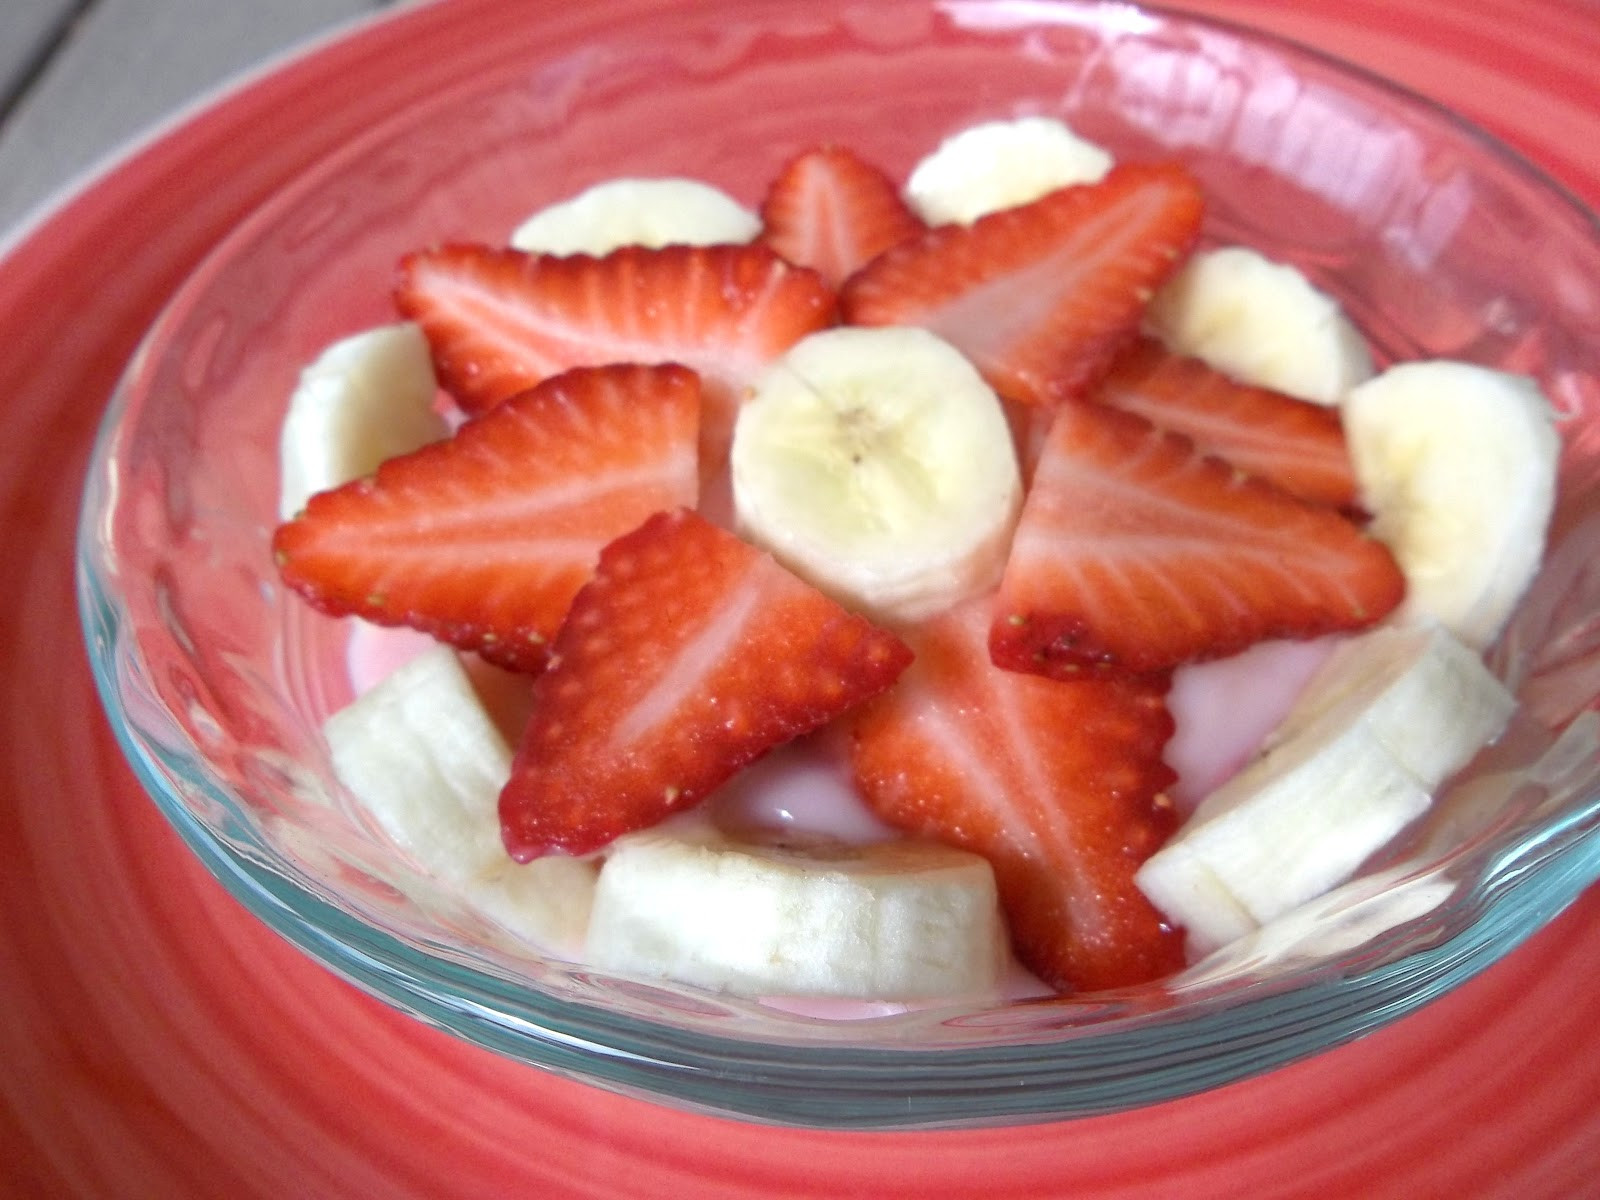 Healthy Snacks For Toddlers
 10 Healthy Snack Ideas for Kids